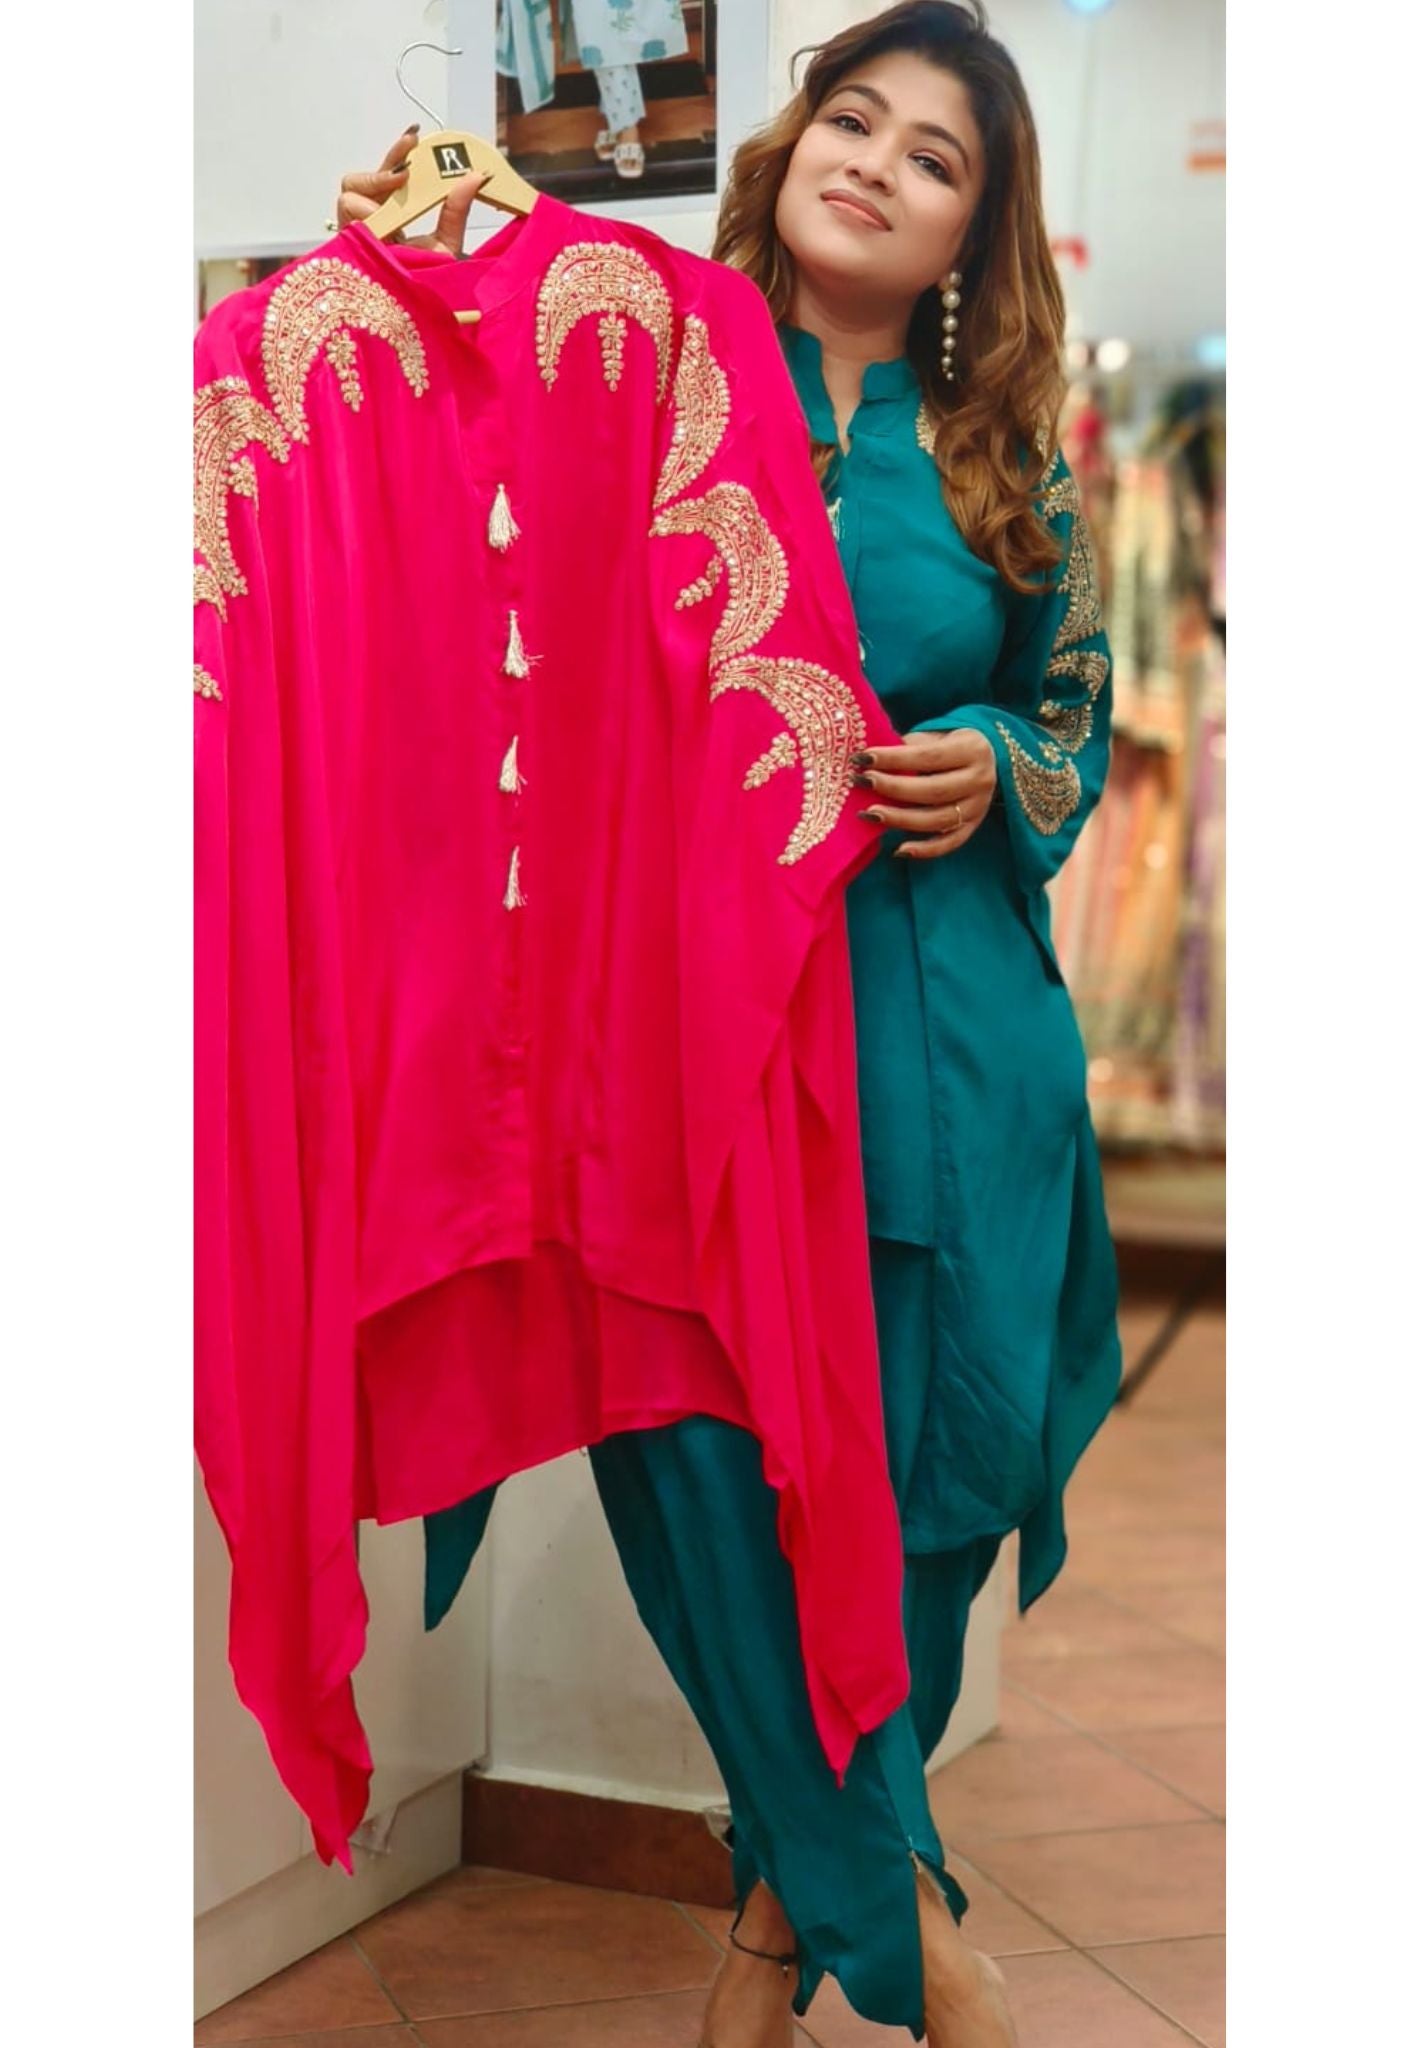 Party Wear Embroidered Kaftan wlWith Tulip Pants indo-western outfit DRY WASH- 06088 -87